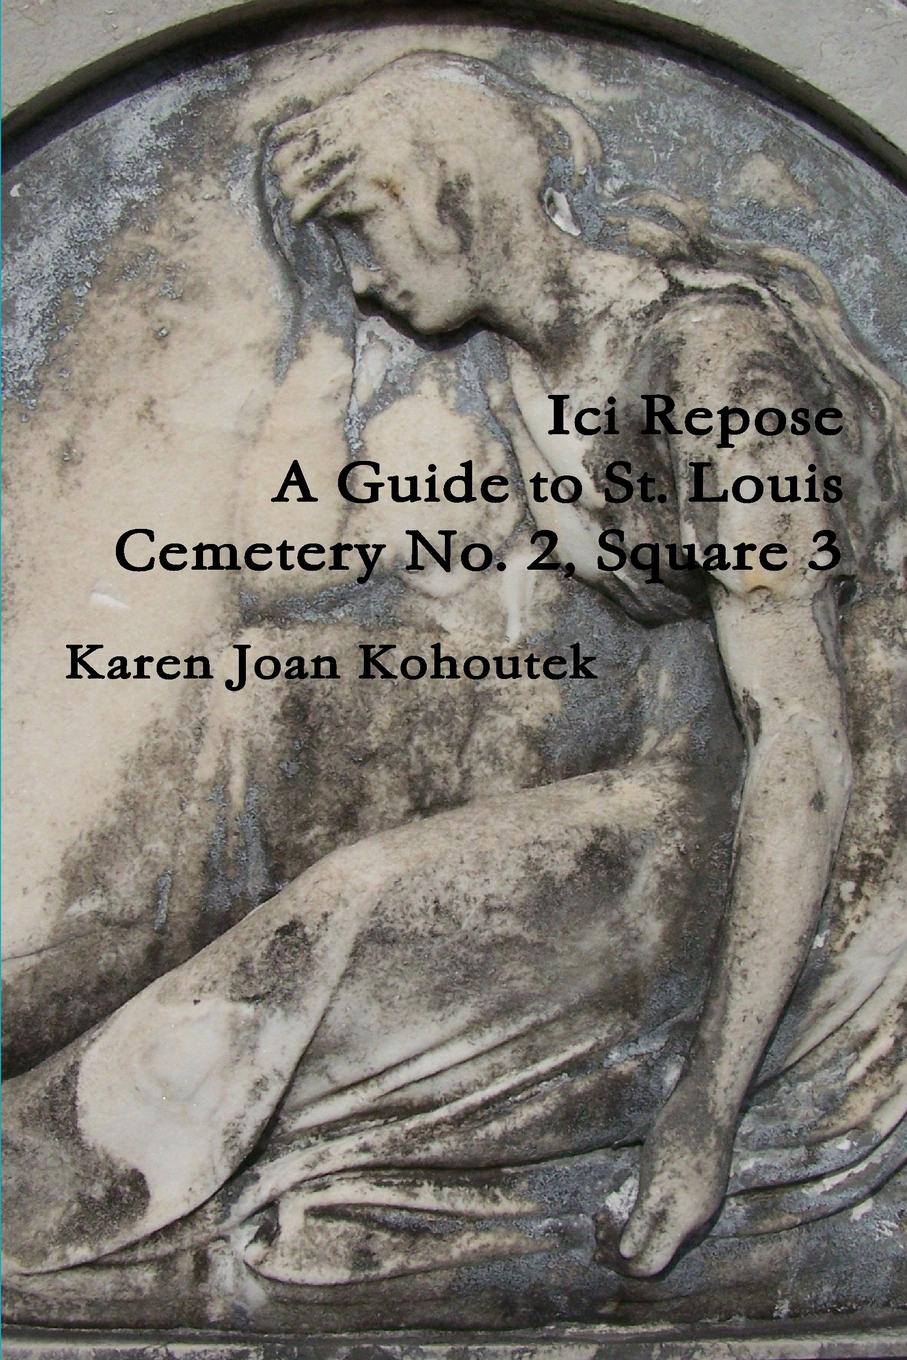 Ici Repose. A Guide to St. Louis Cemetery No. 2, Square 3